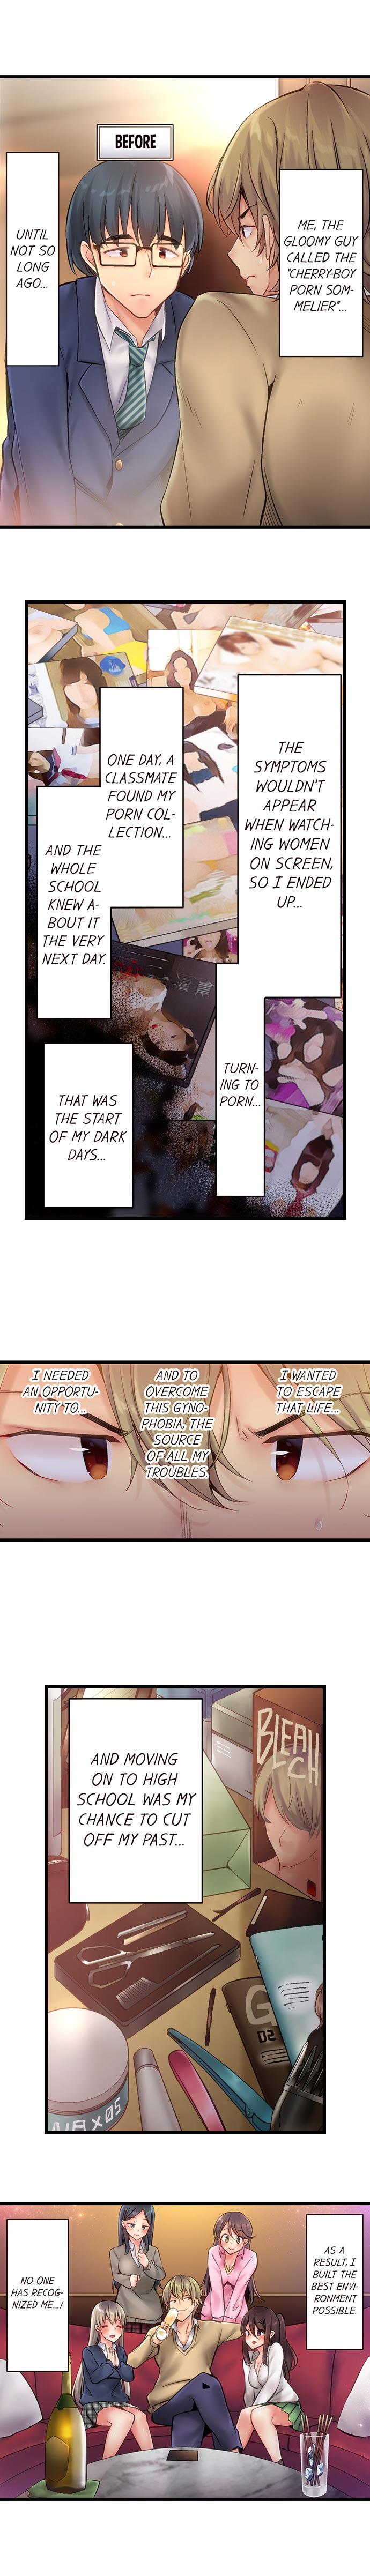 Thot Busted in One Thrust - Original Family Sex - Page 8